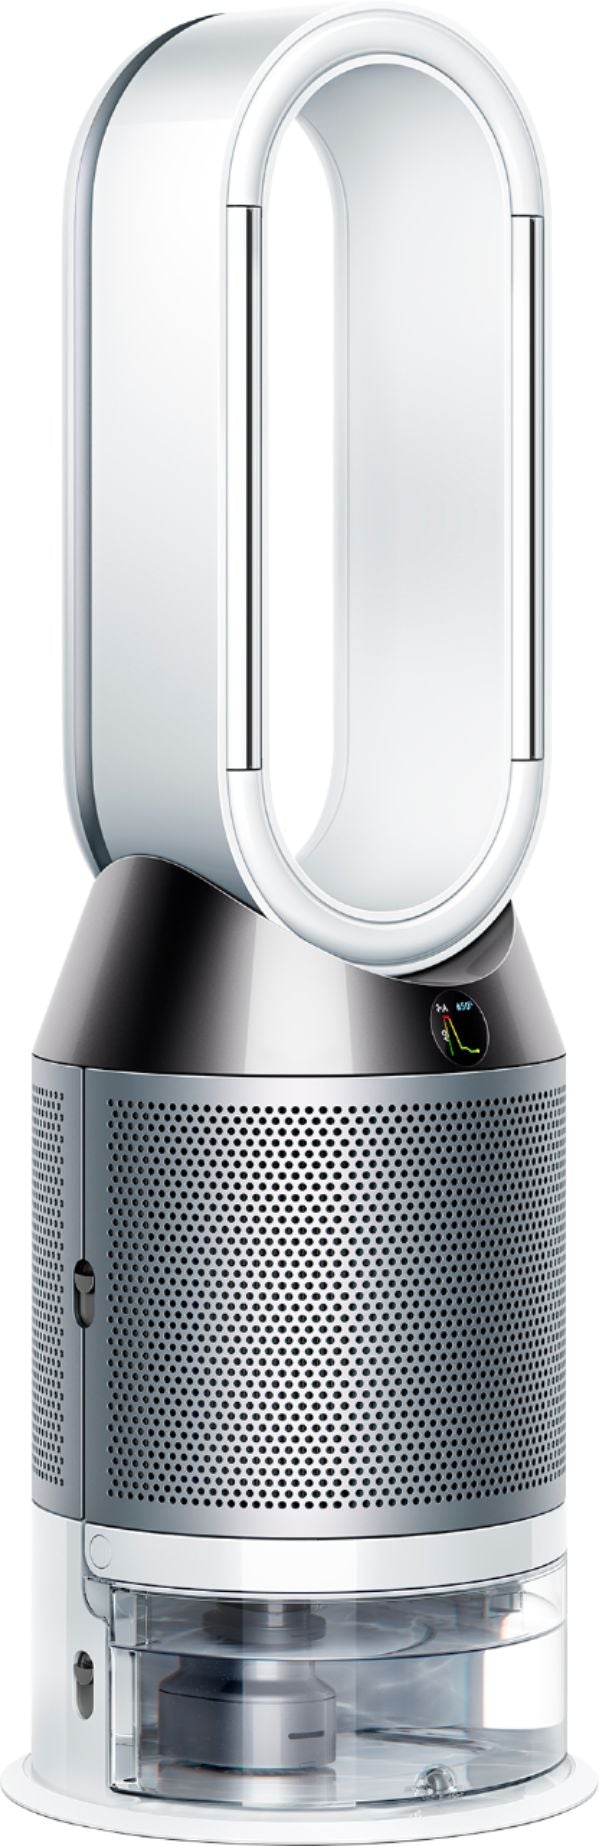 DYSON PURE HUMIDIFY+COOL - REFURBISHED WITH 1 YEAR DYSON WARRANTY - PH01